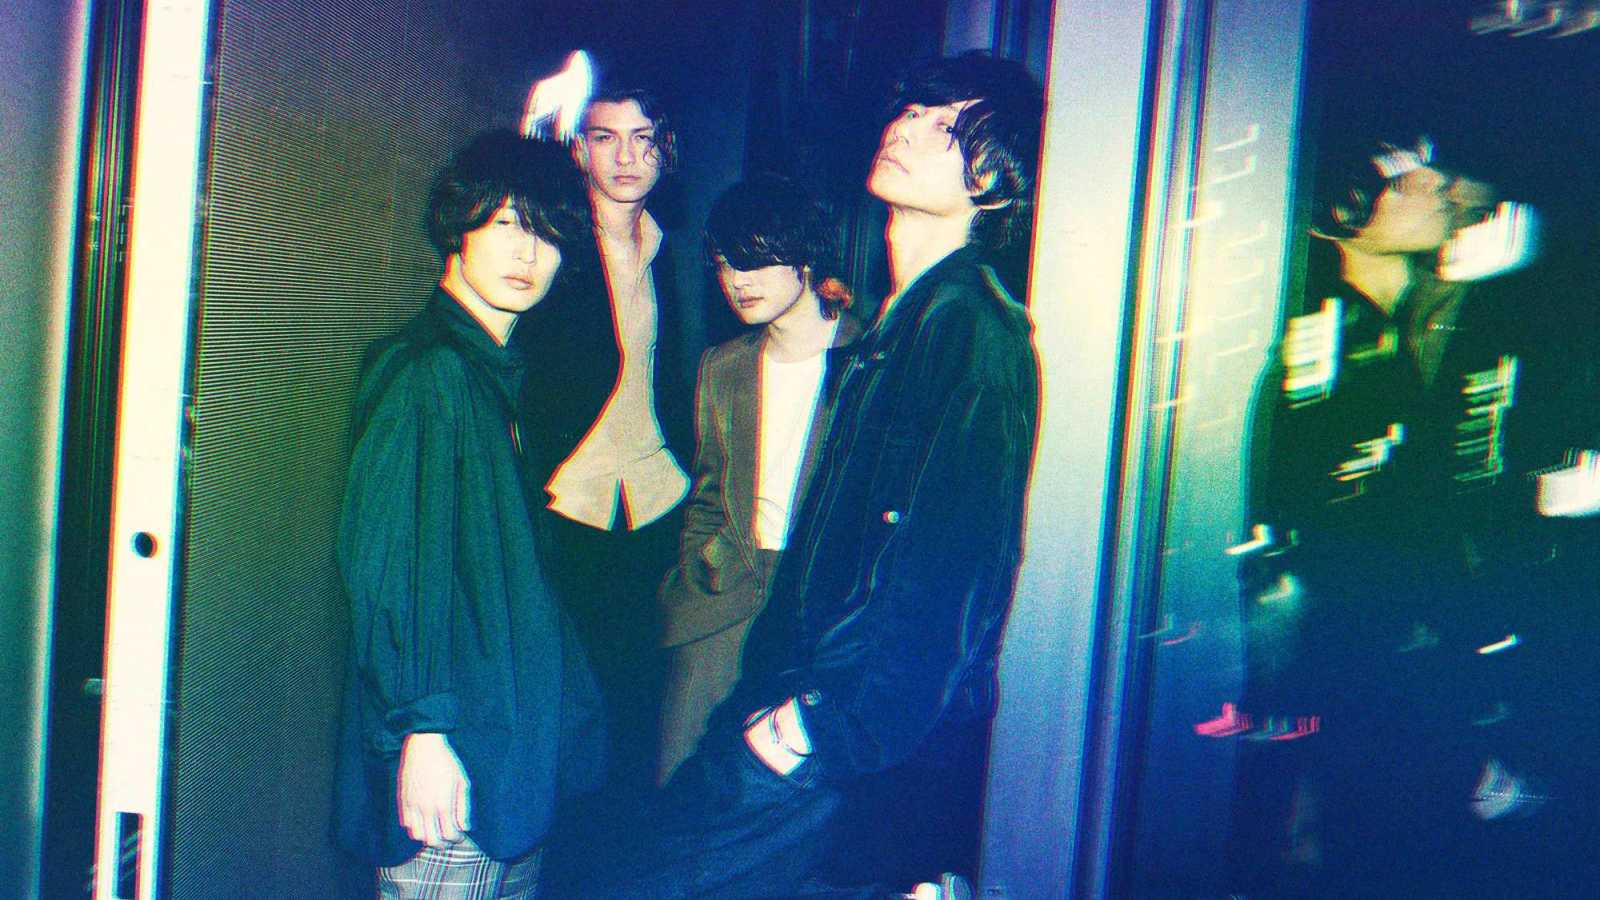 New Album from [Alexandros] © [Alexandros]. All rights reserved.